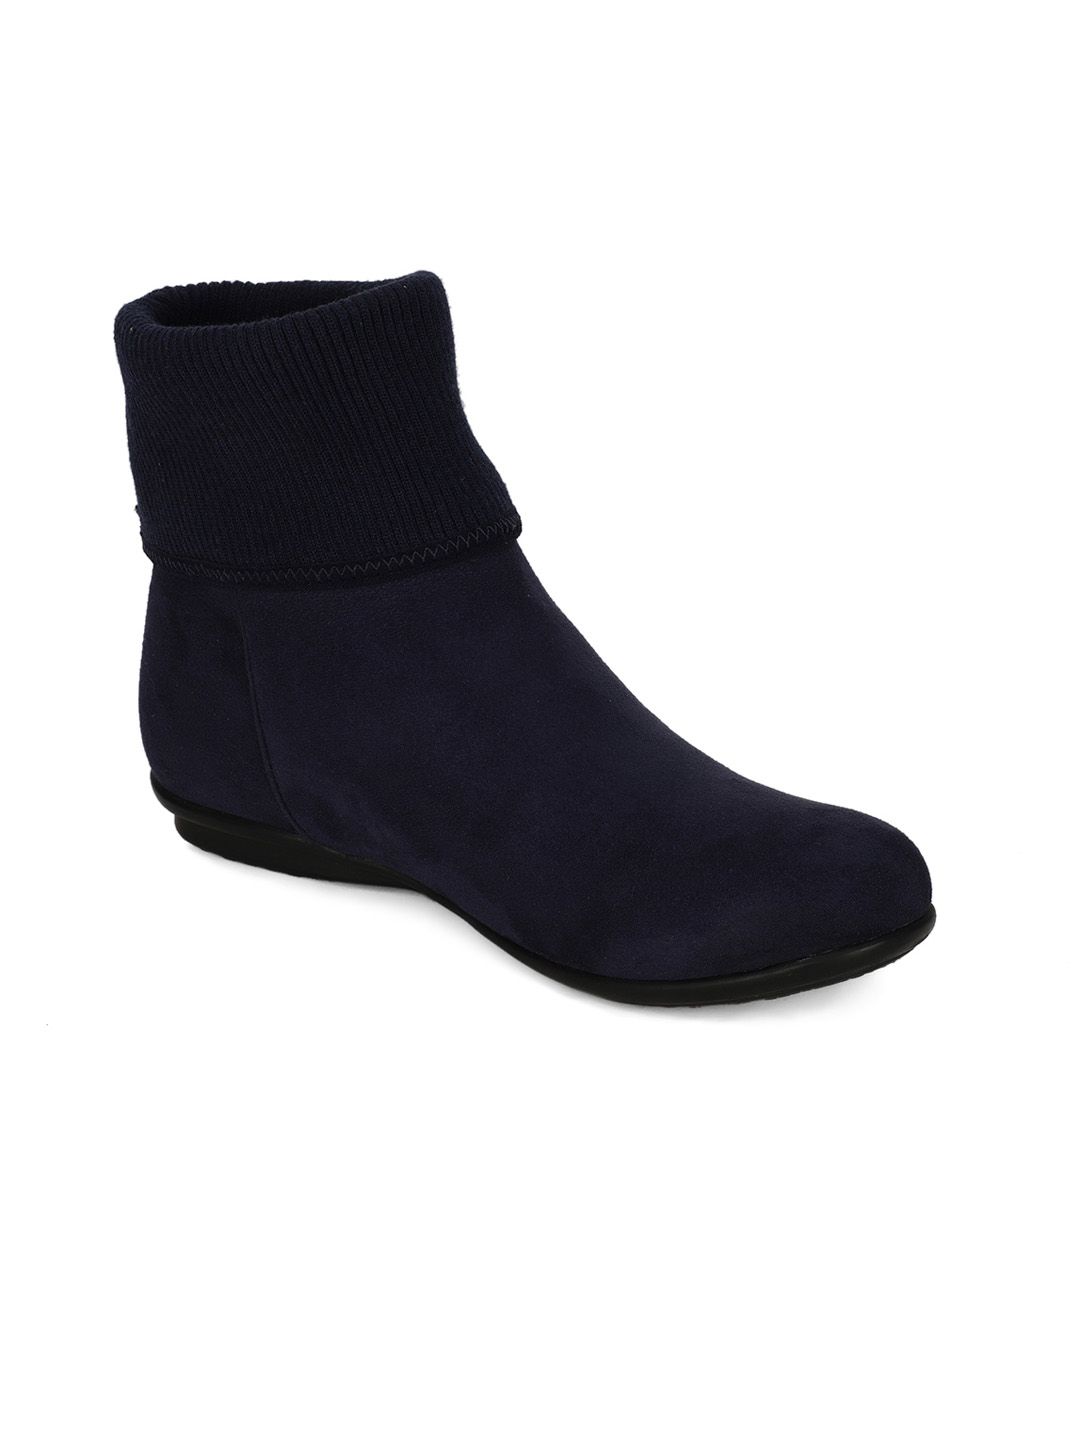 Bruno Manetti Navy Blue Suede High-Top Comfort Heeled Boots Price in India